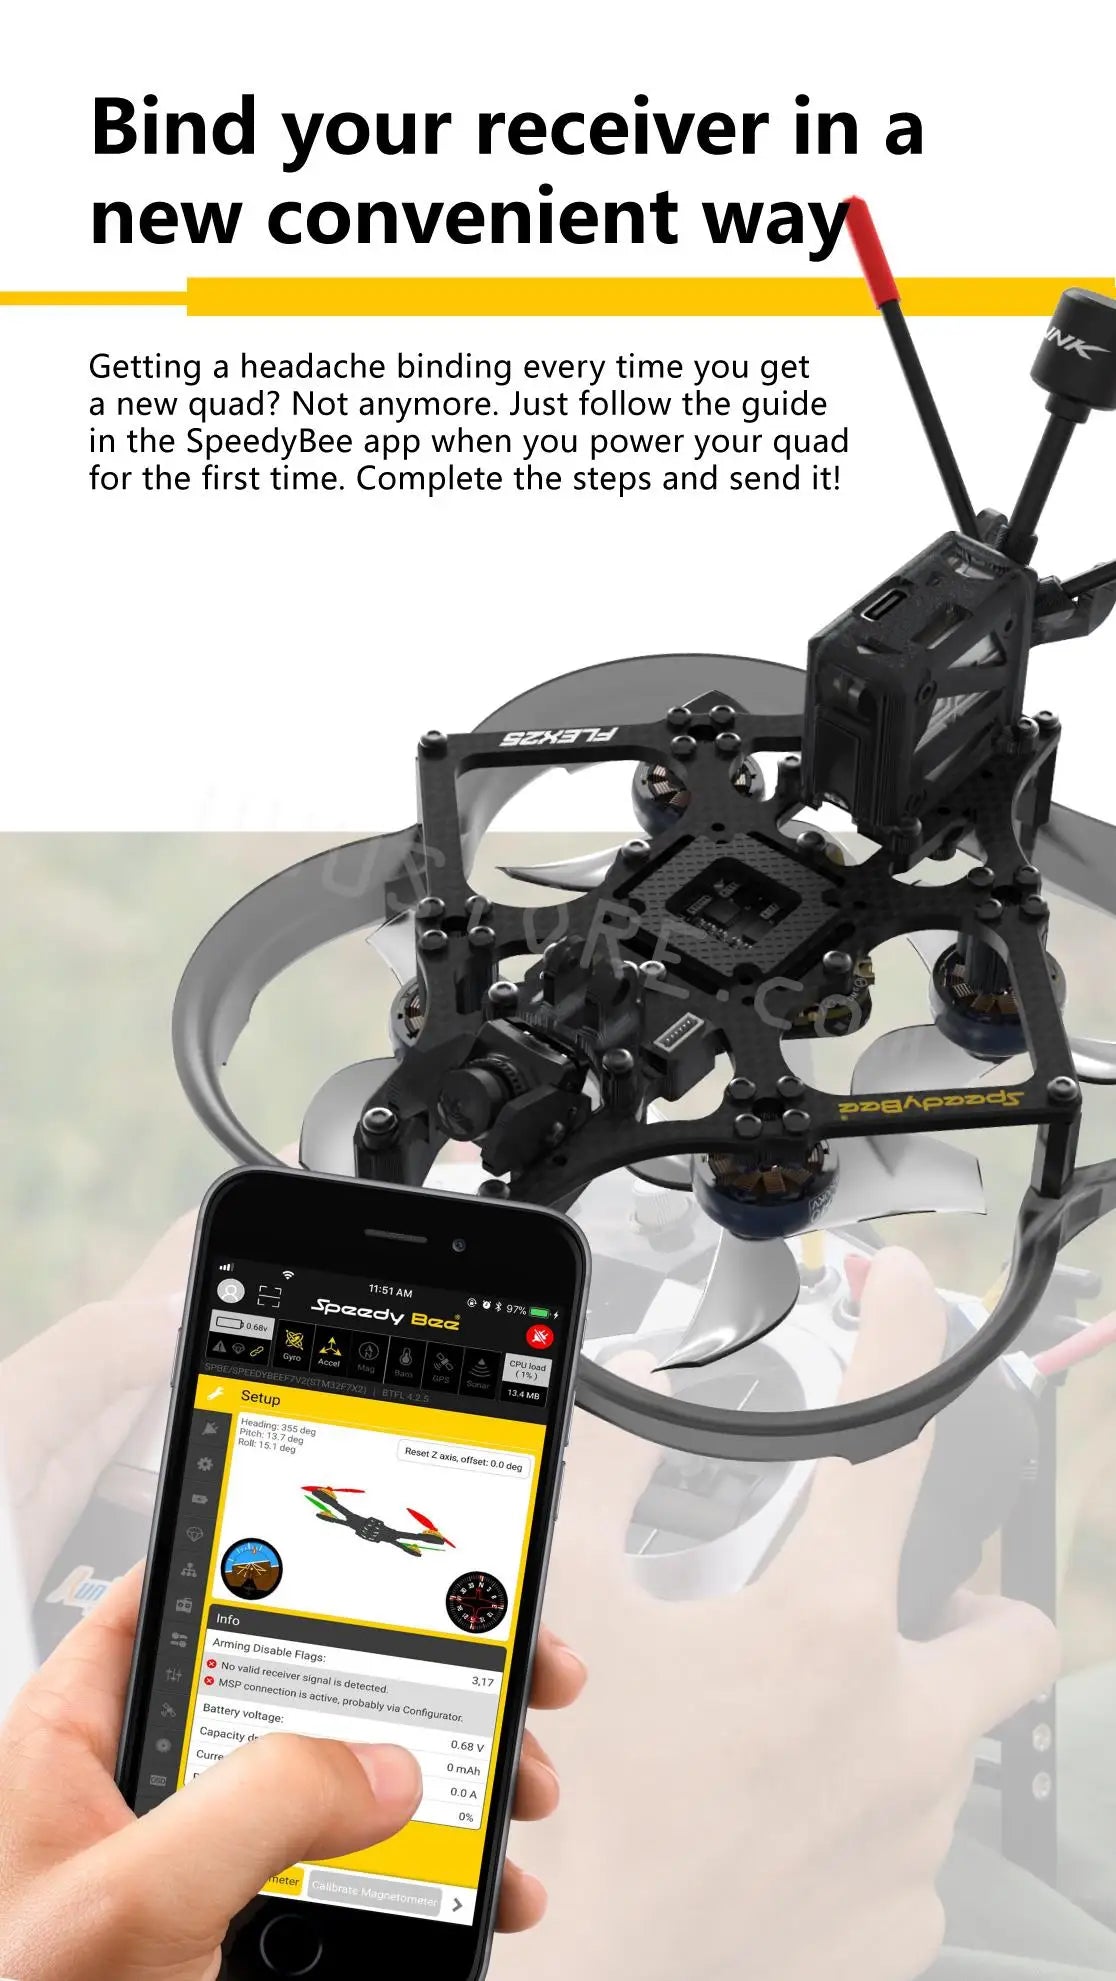 SpeedyBee Flex25, follow the in the SpeedyBee app when you power your quad for the first time: